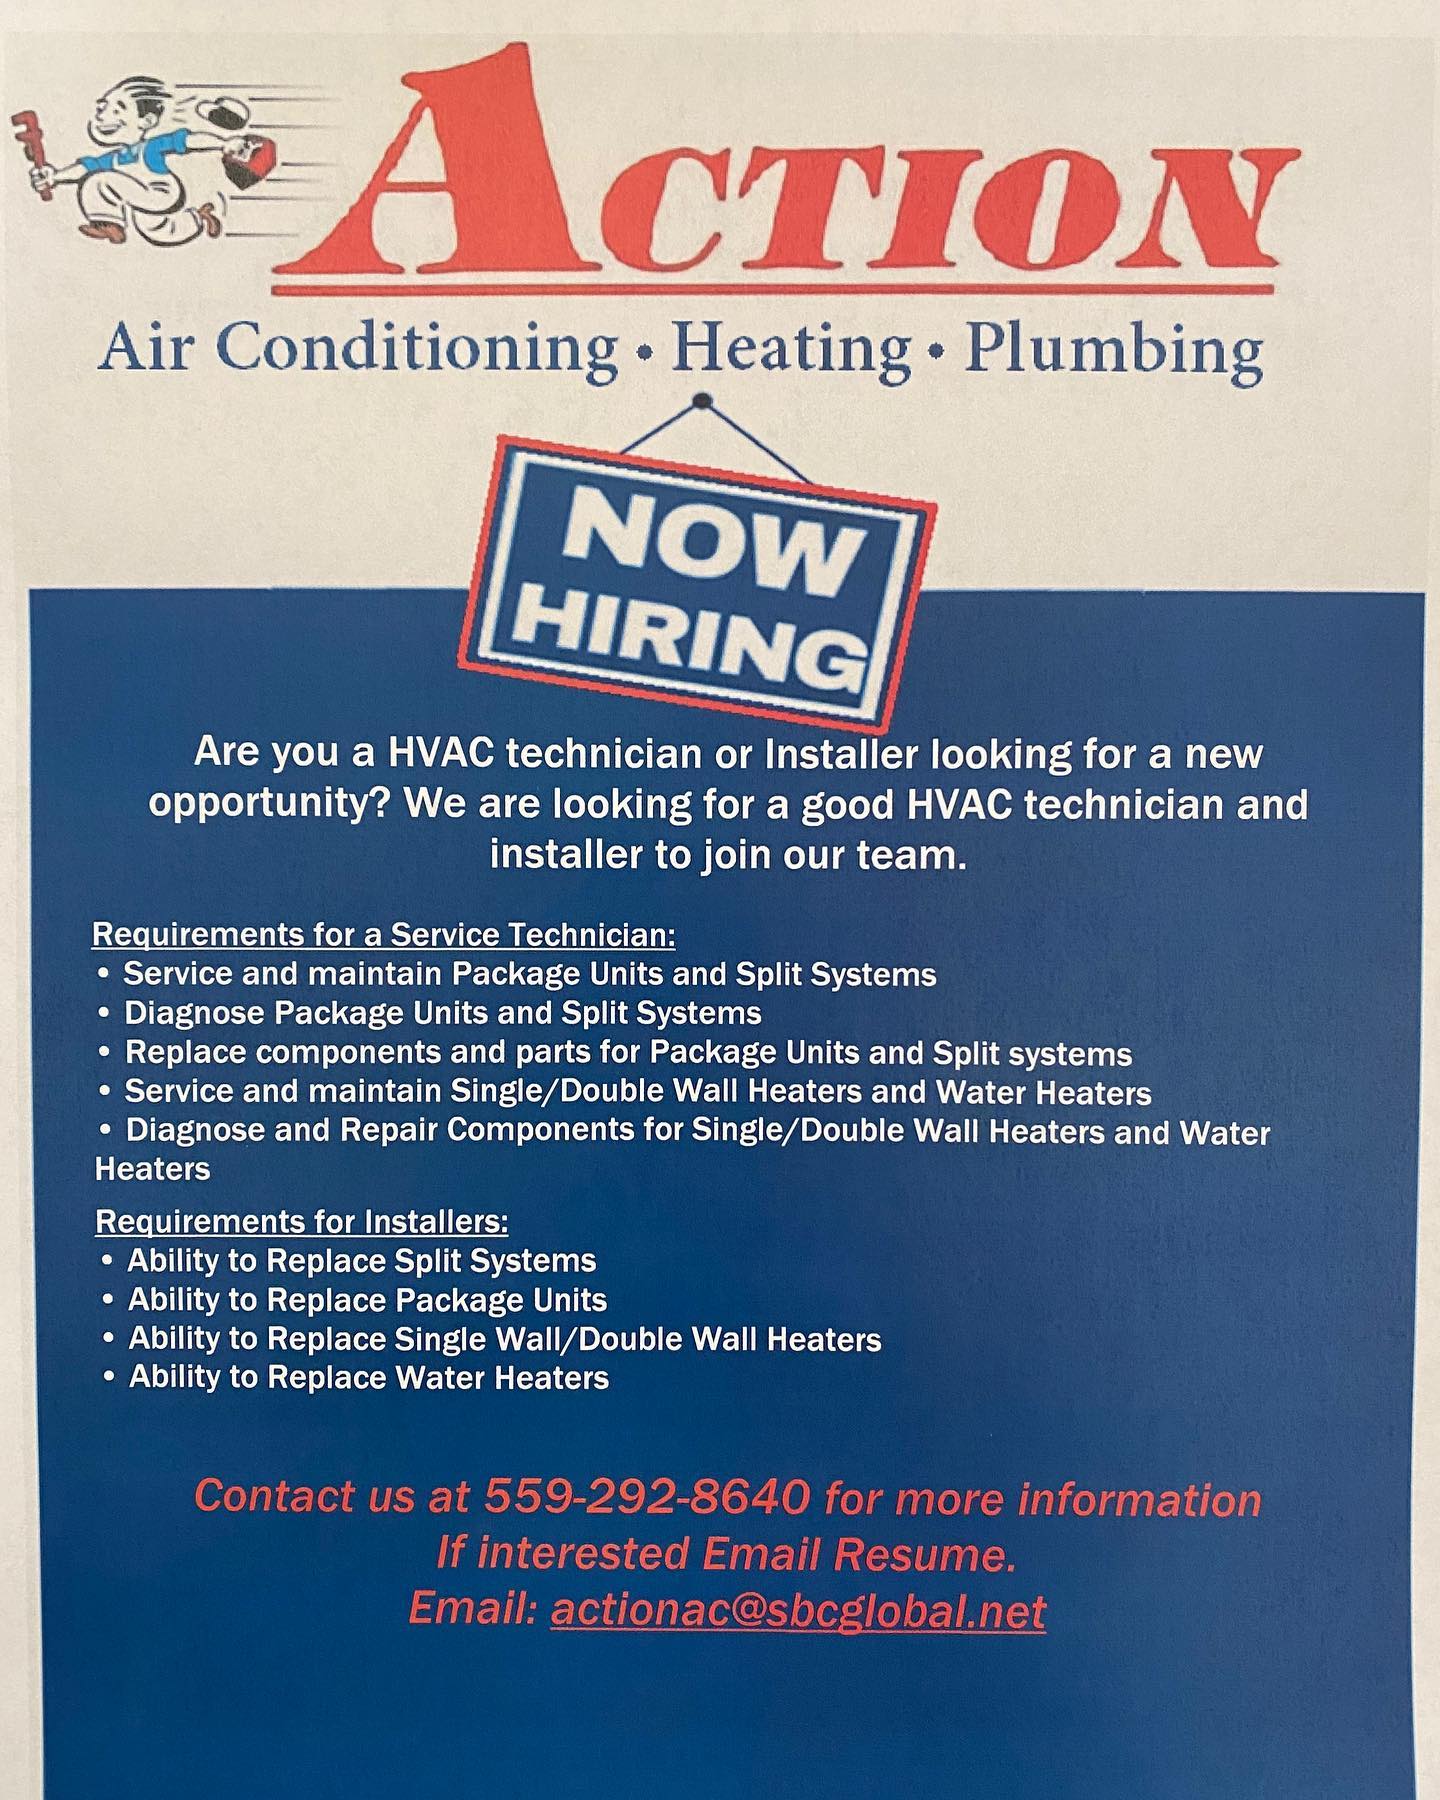 Action Air Conditioning Heating & Plumbing